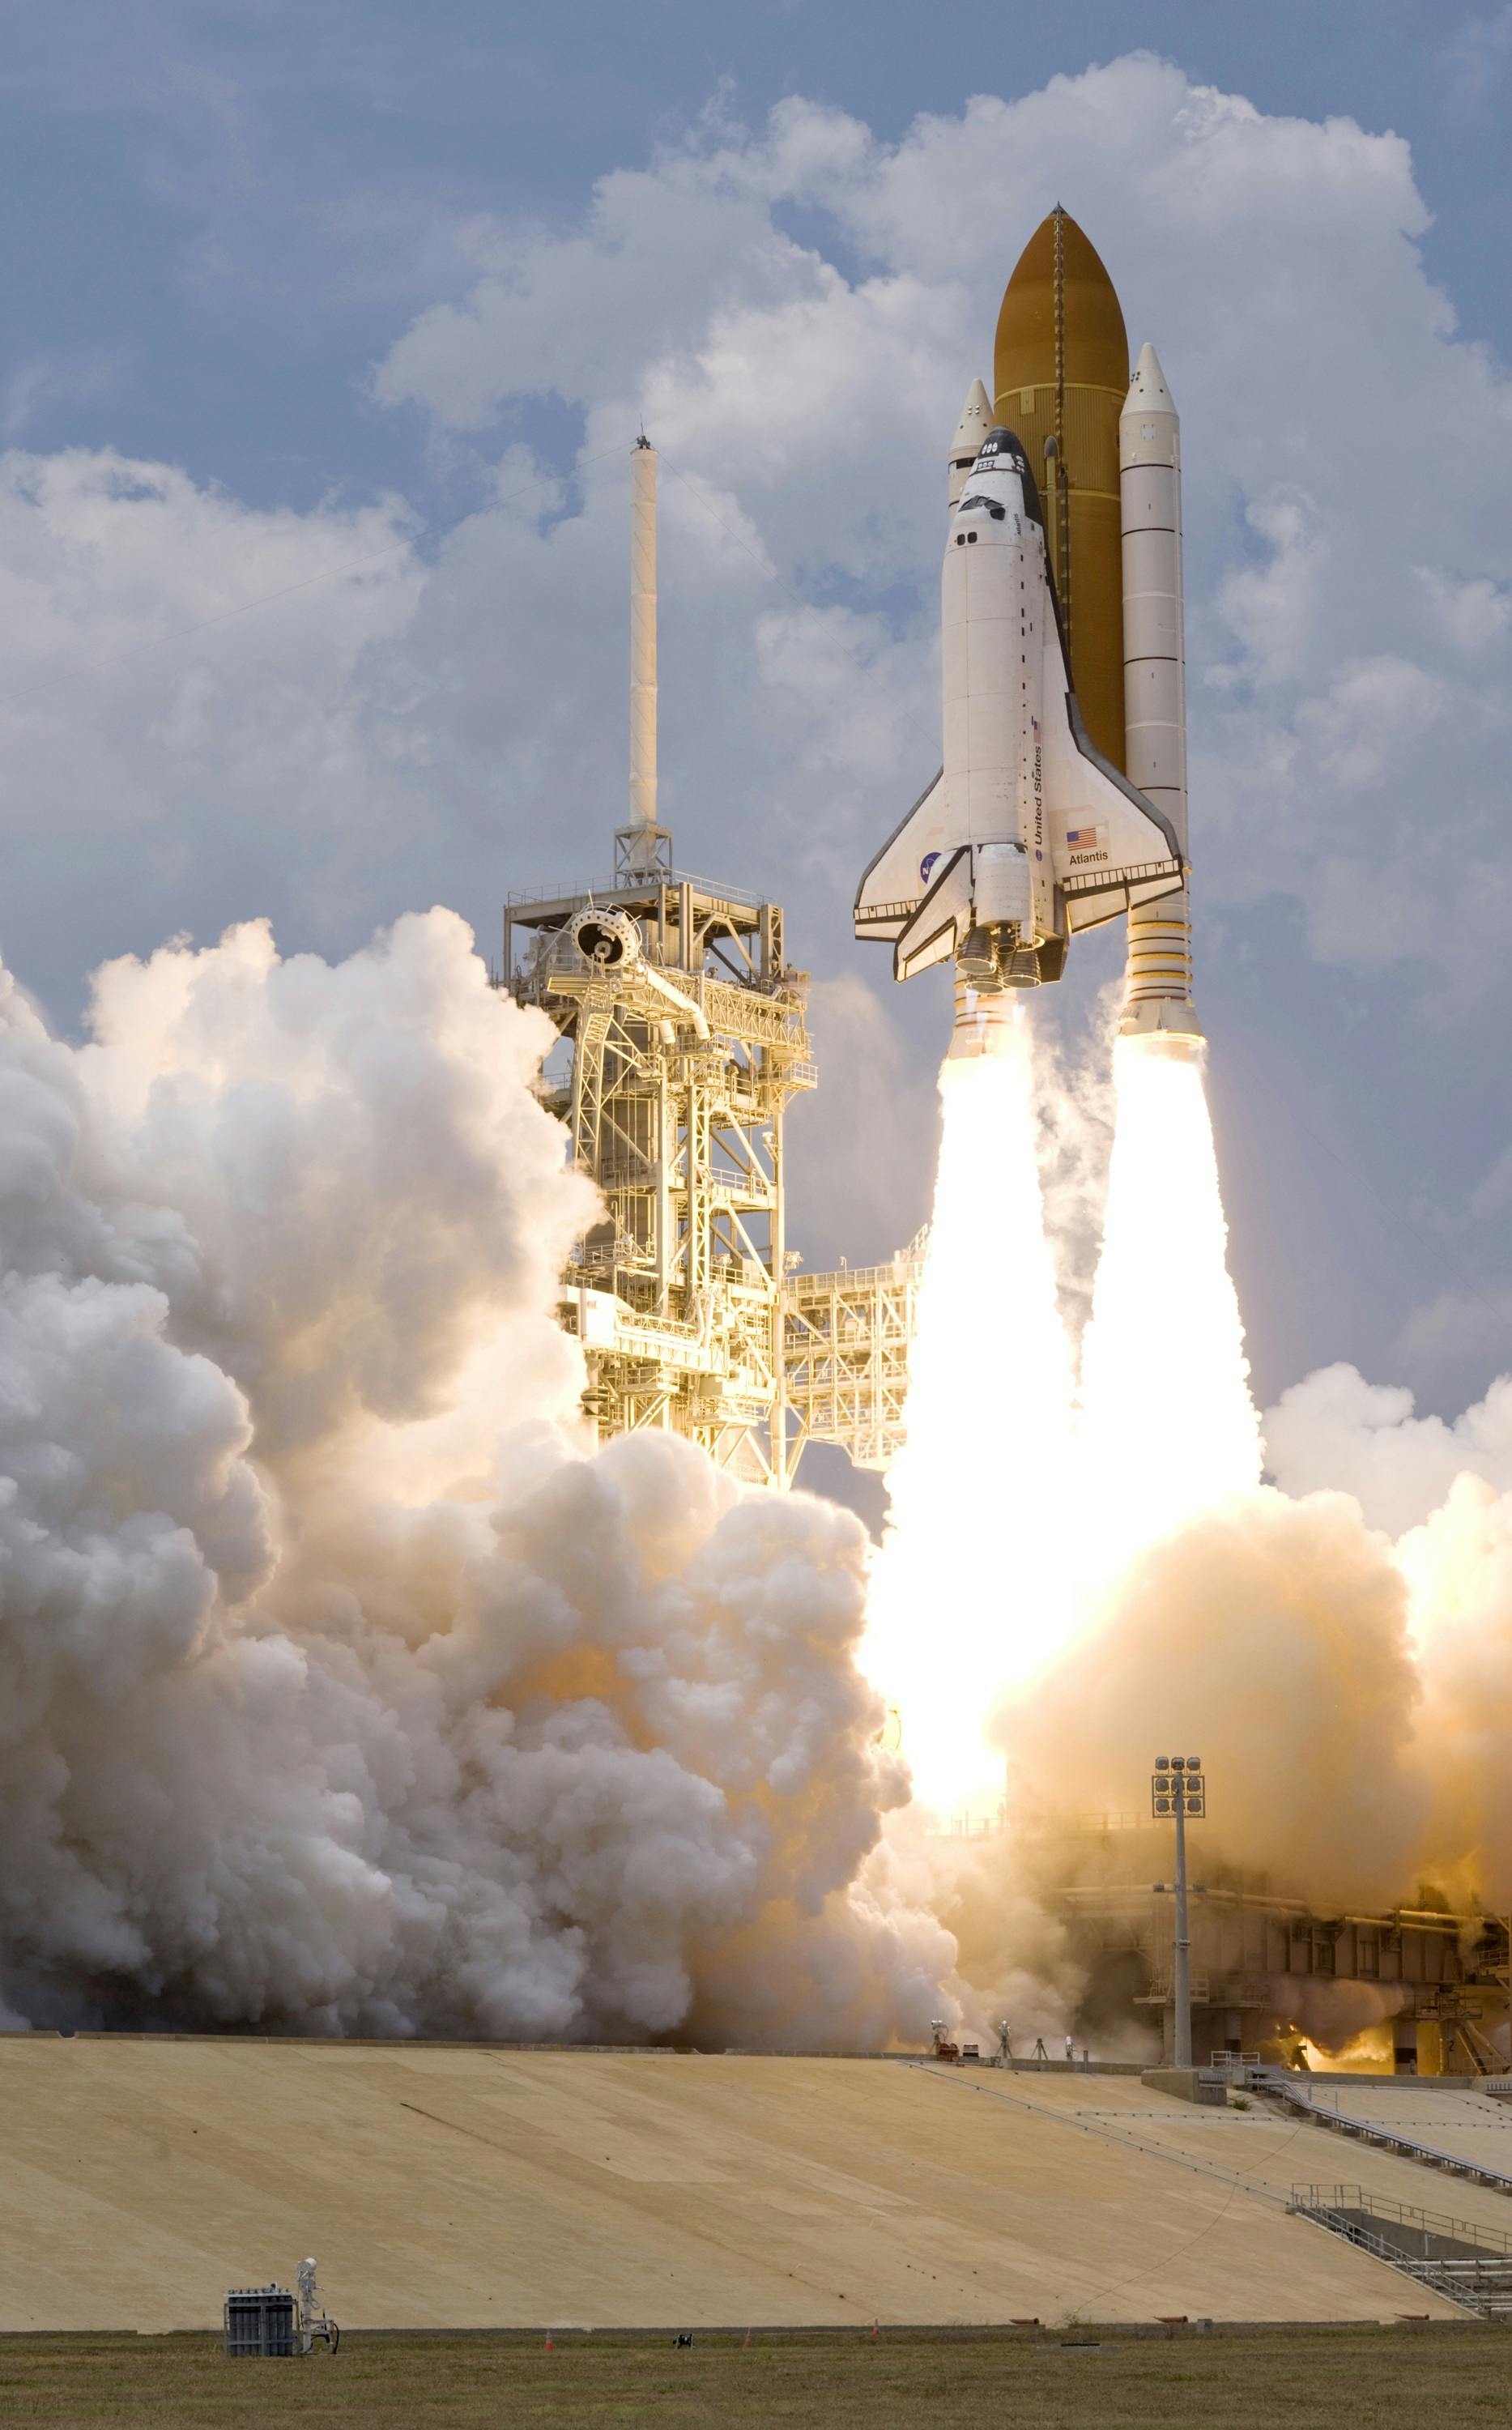 downloadable photos of space shuttle